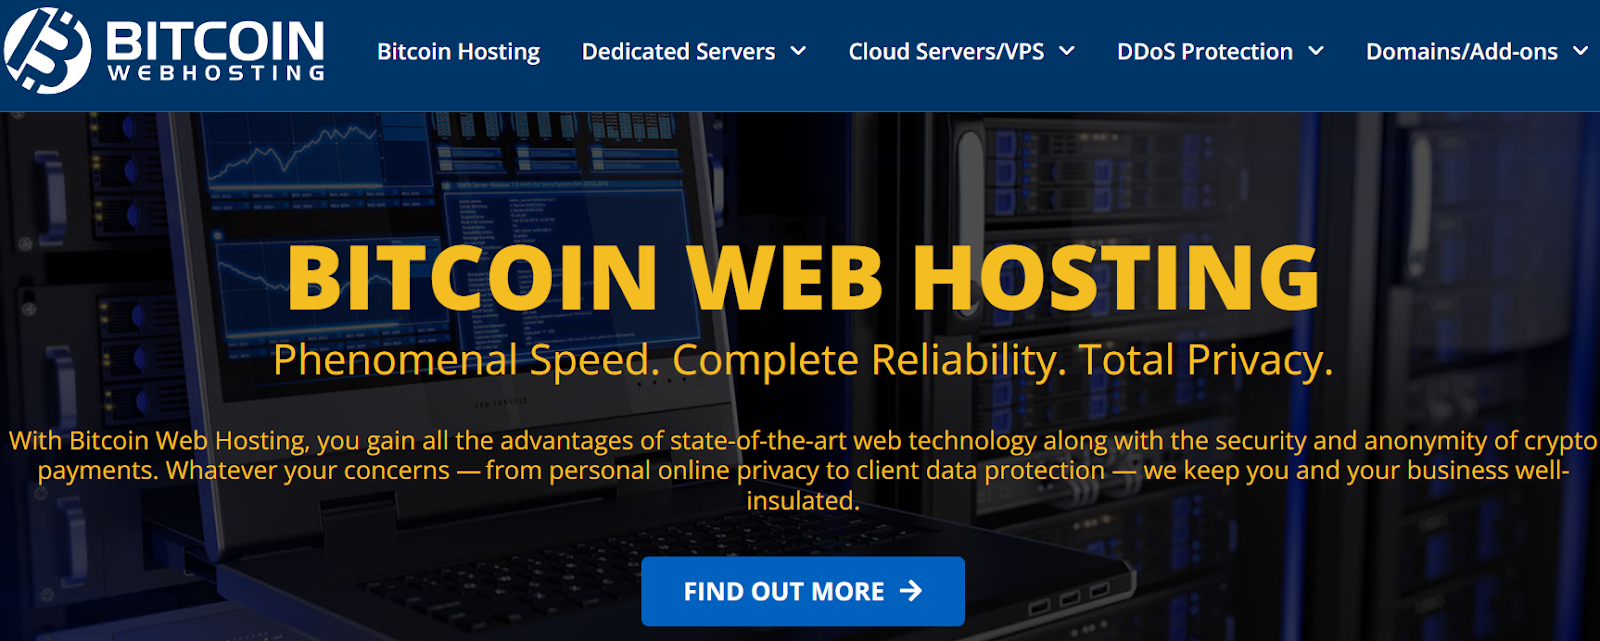 Buy Dedicated Server with Bitcoin - Secure and Fast Transactions